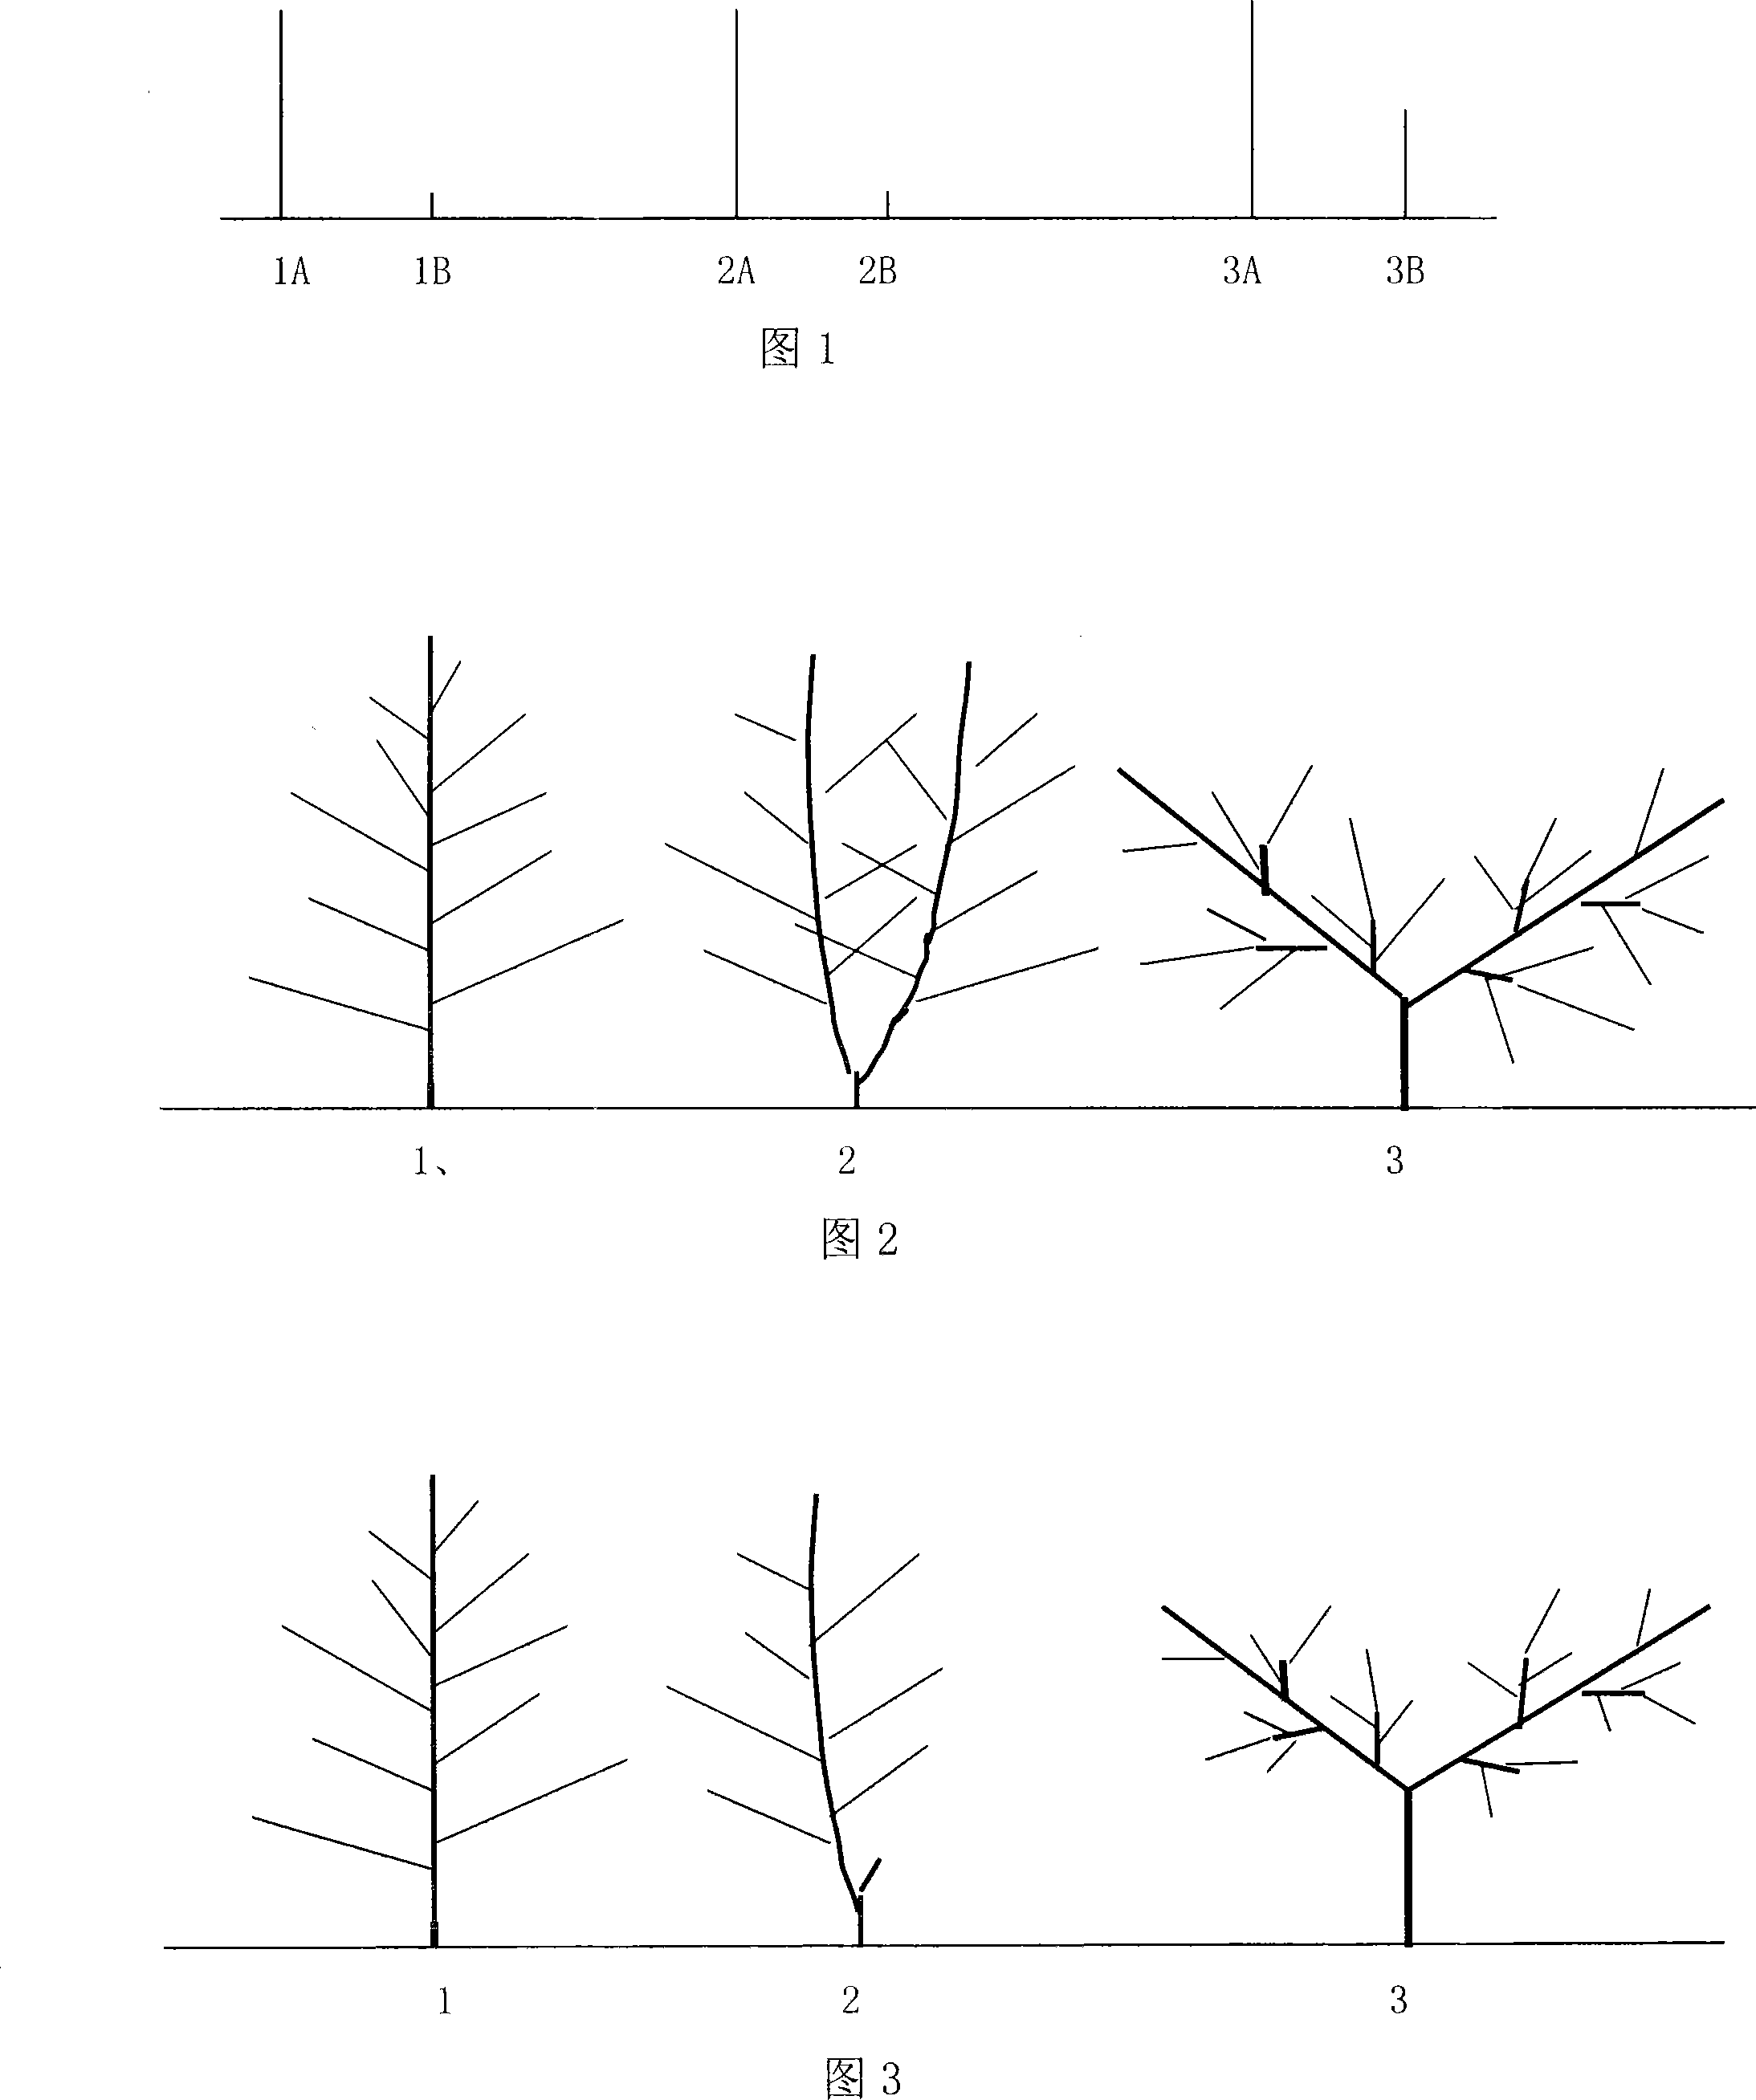 A peach shape for high-density planting and tree body controlling means